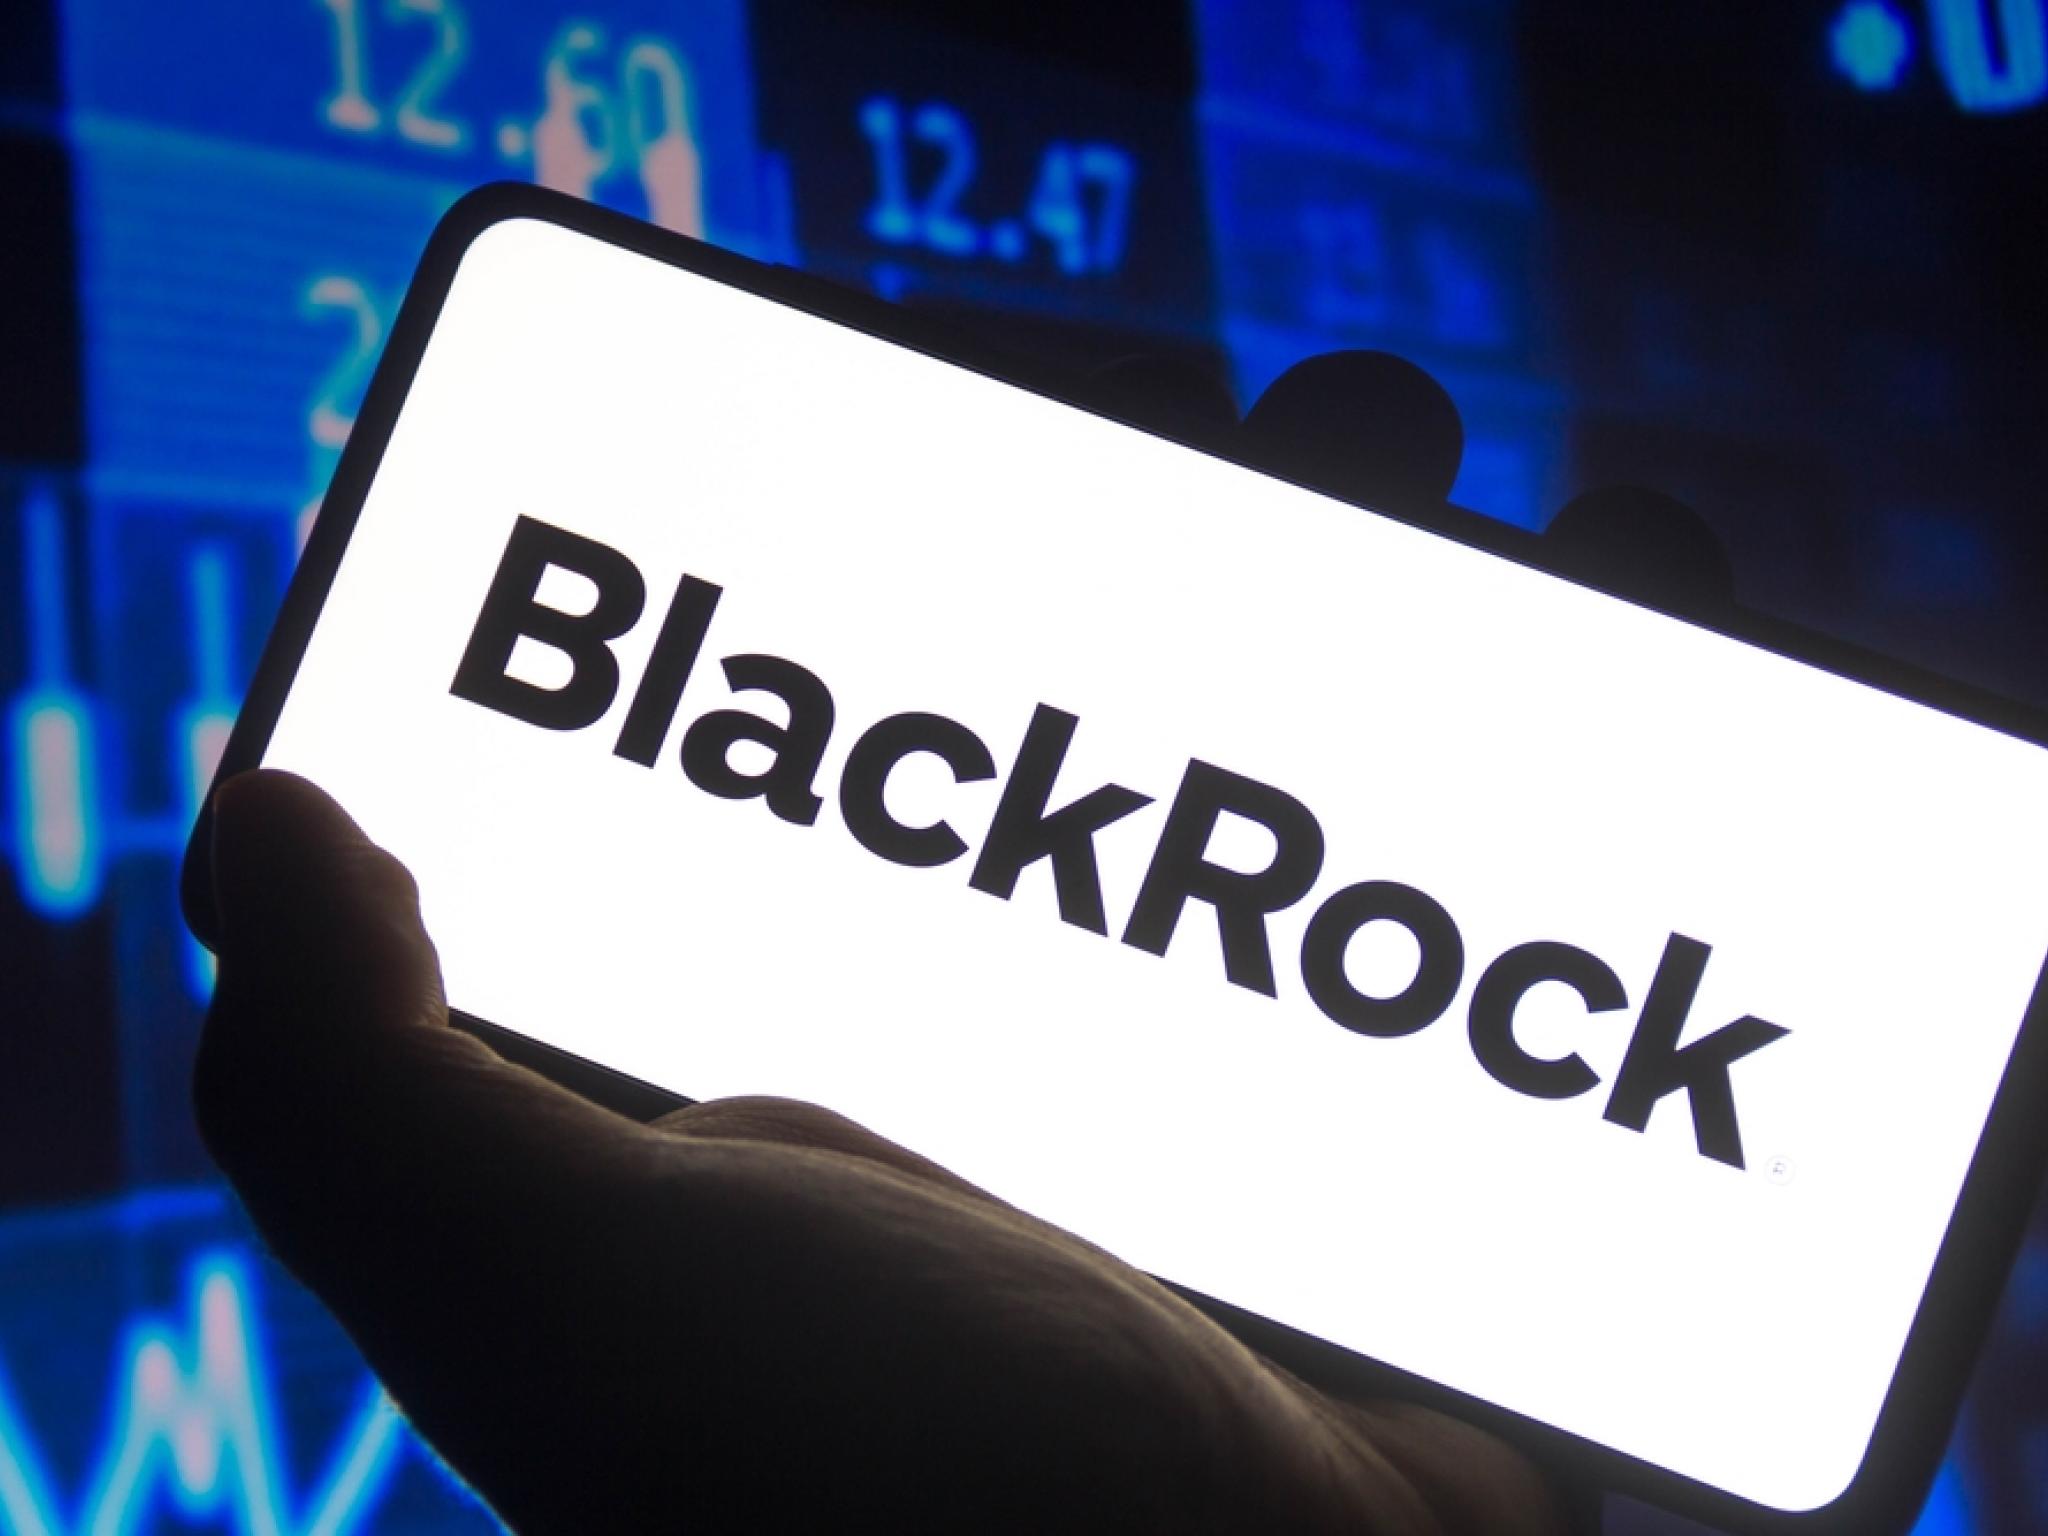  blackrocks-preqin-acquisition-to-drive-revenue-synergies-analyst-sees-expansion-in-emerging-private-markets 